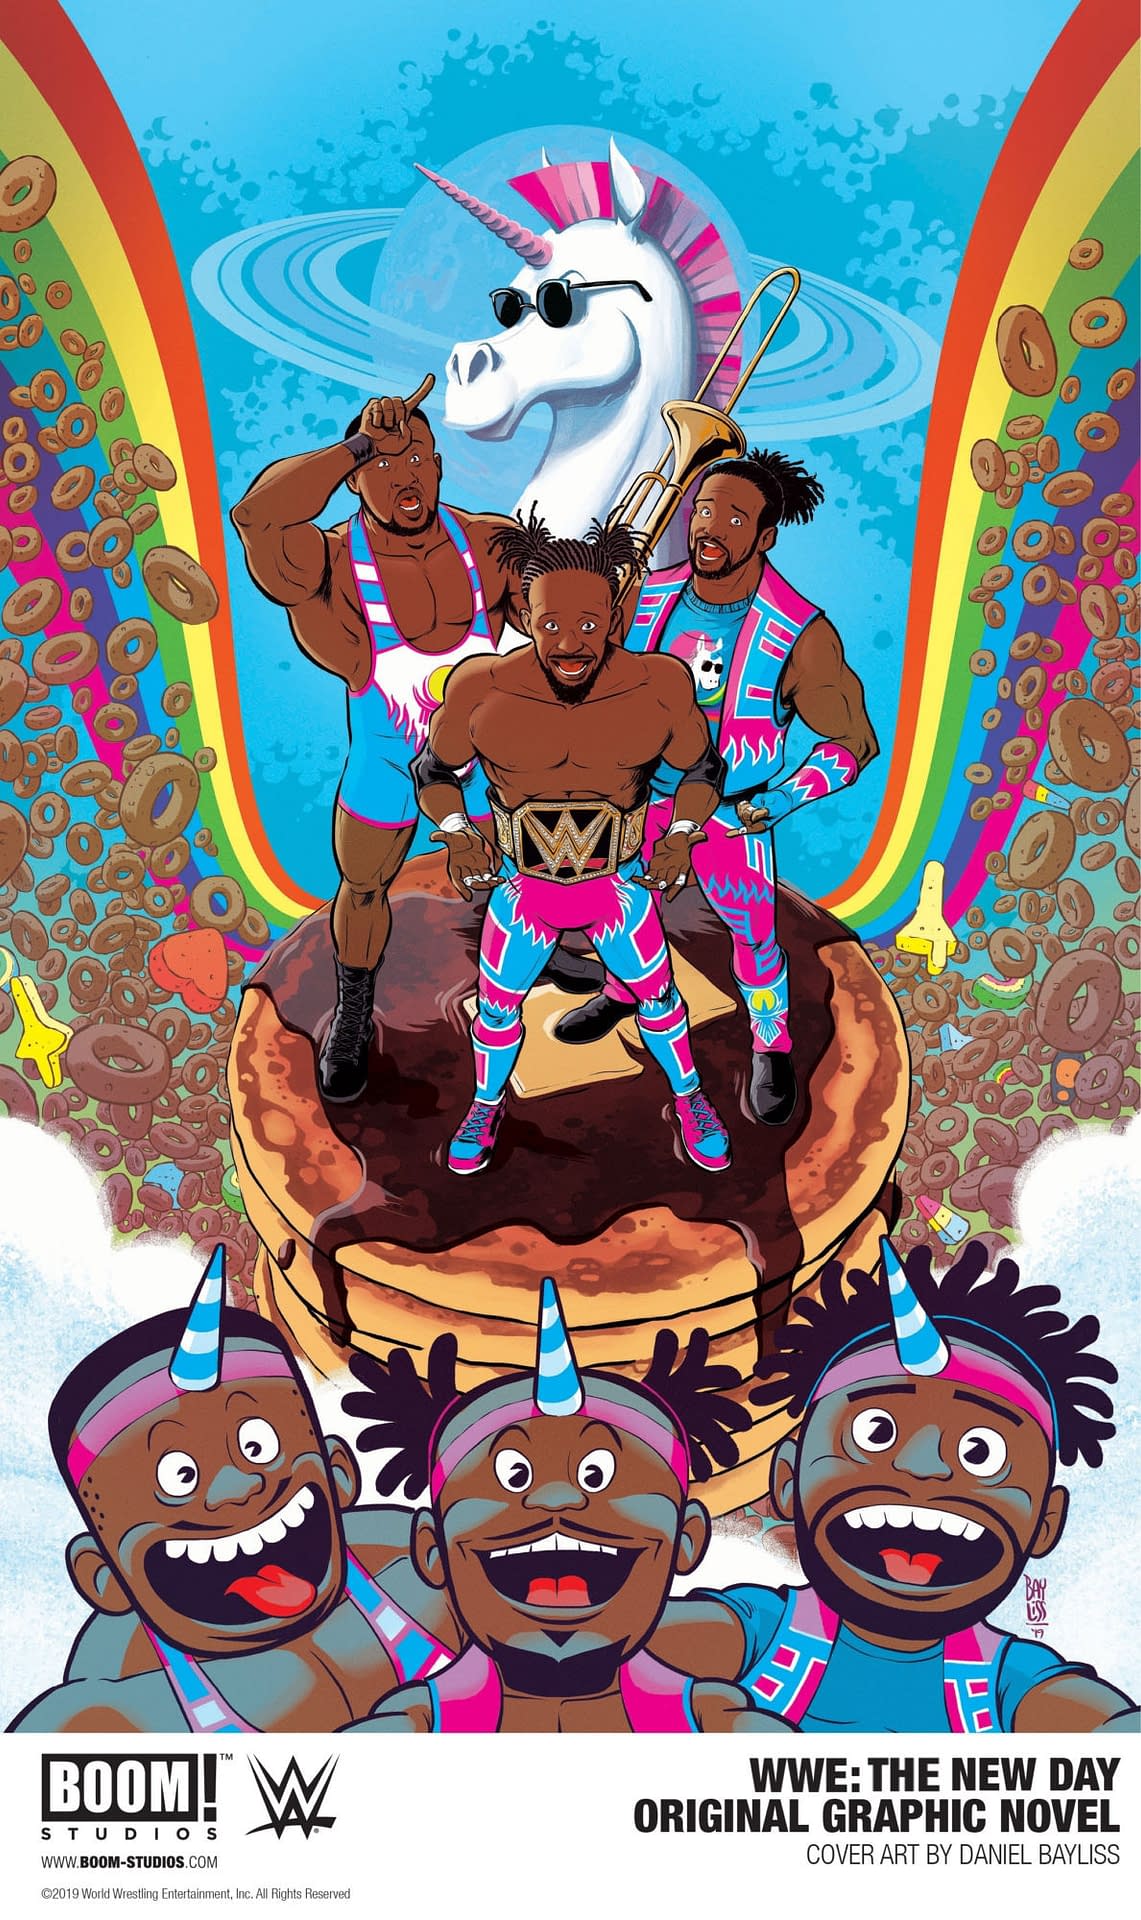 Evan Narcisse, Austin Walker, and Daniel Bayliss Are the Creative Team for The New Day's OGN